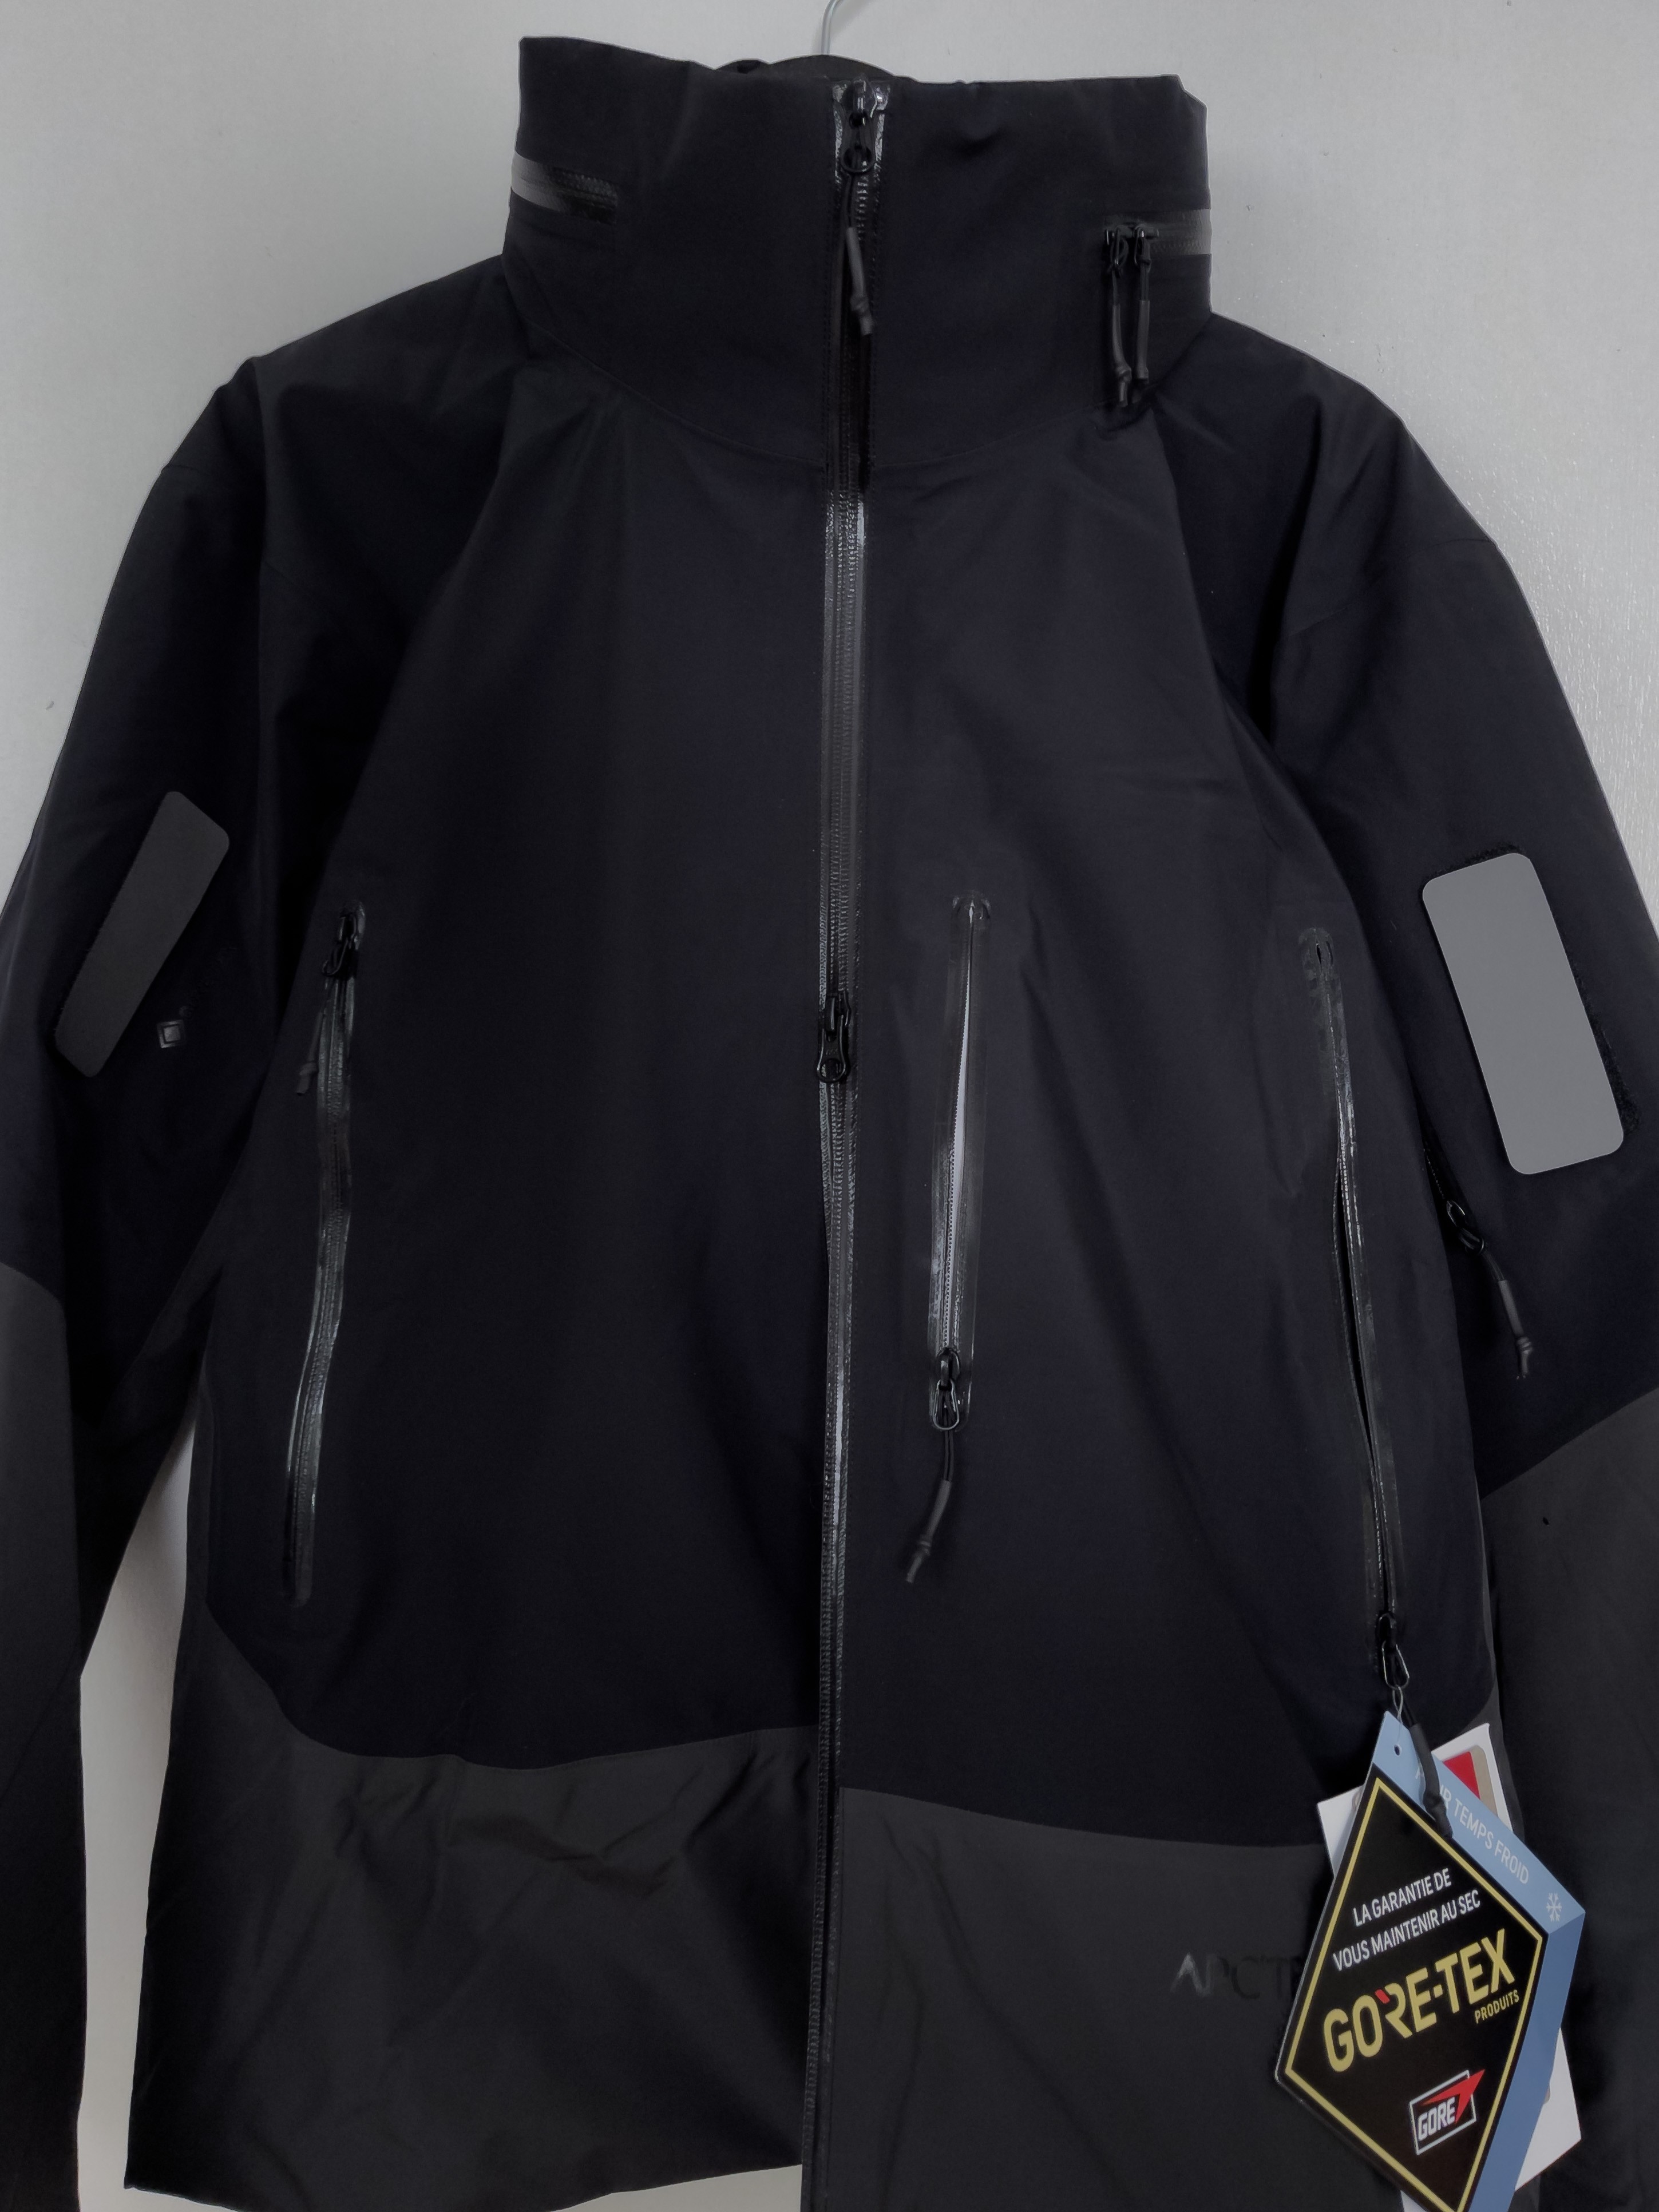 System_A Axis Jacket - 5